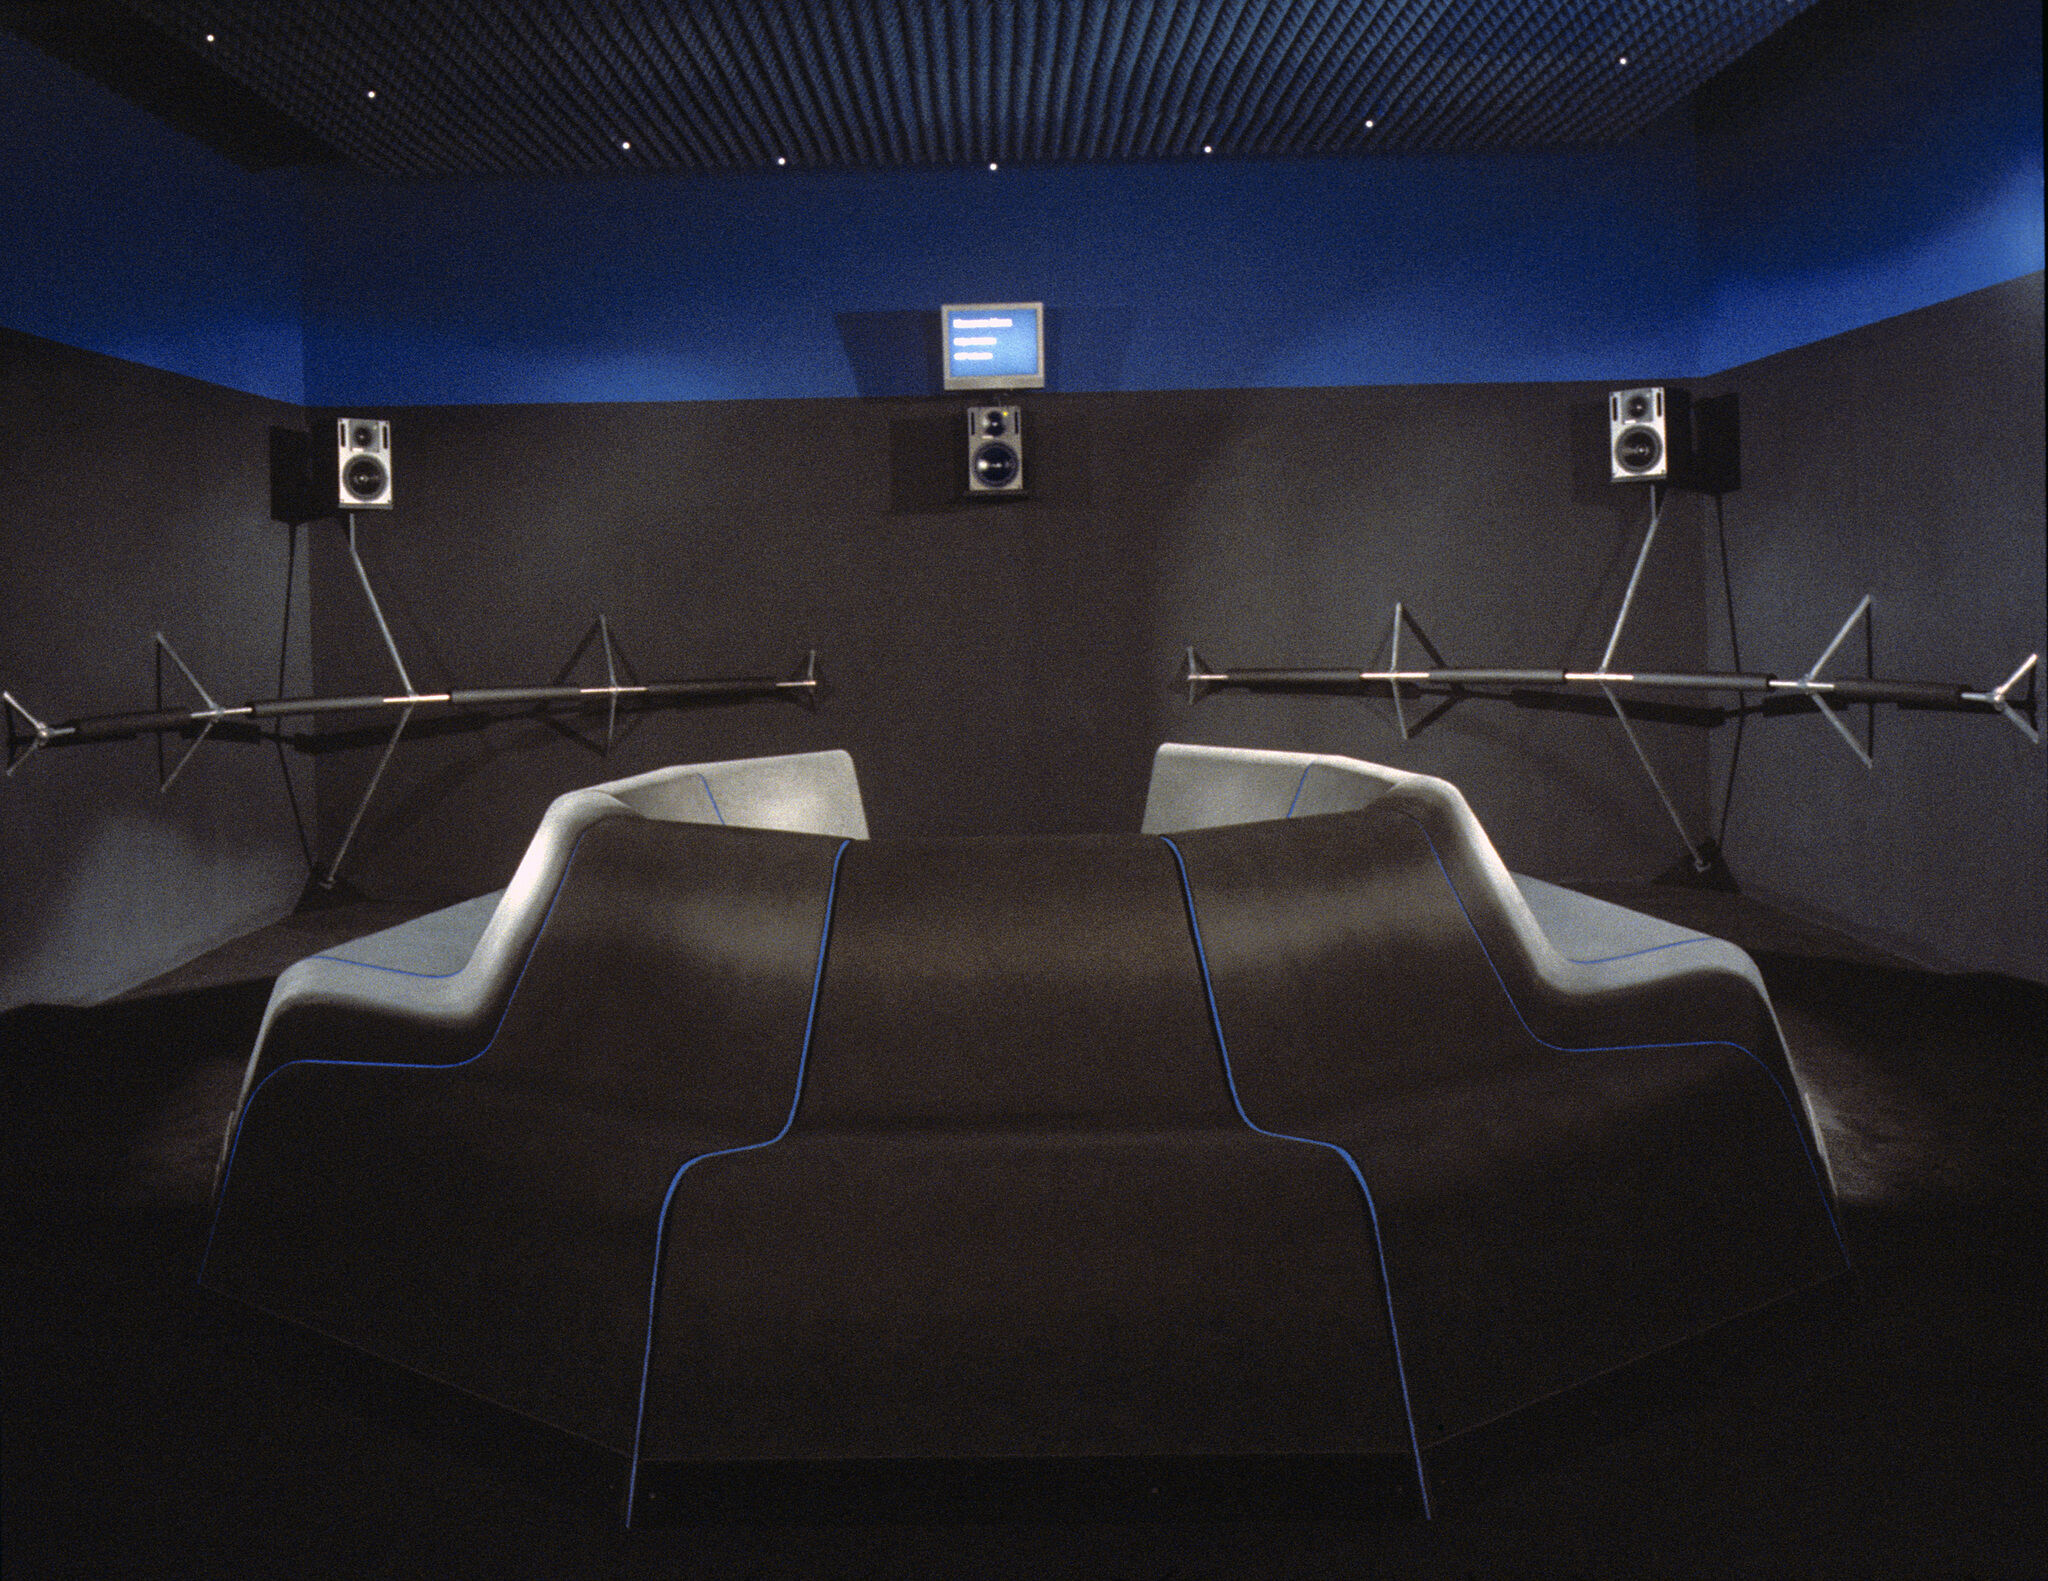 An installation view of a gallery with circular seating, dark gray walls, and three speakers.